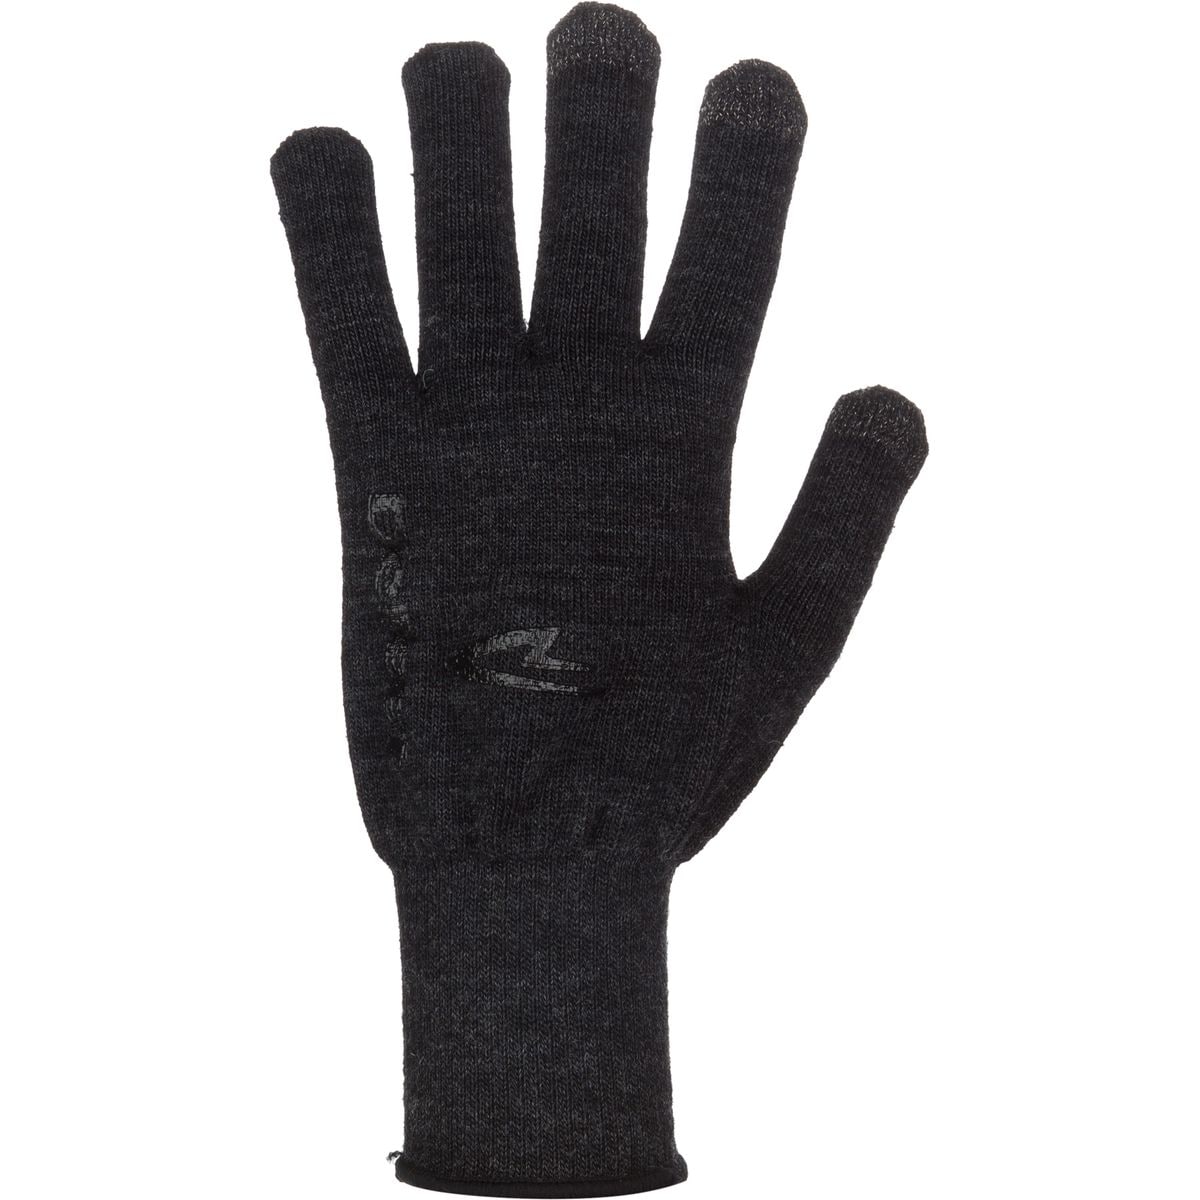 DeFeet Wool Electronic Touch Glove Men's